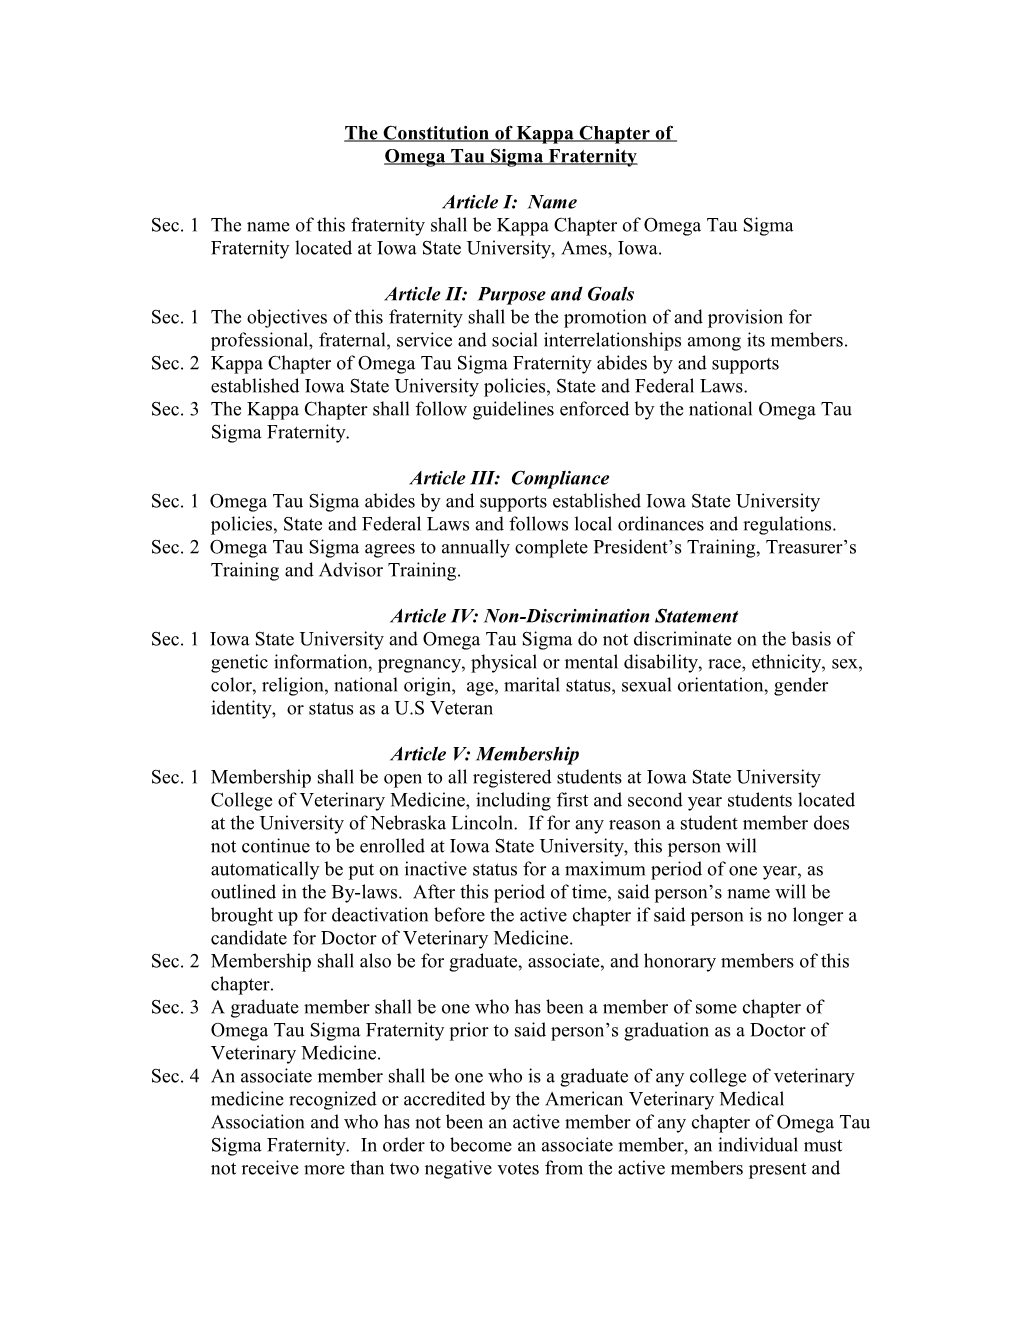 The Constitution of Kappa Chapter Of